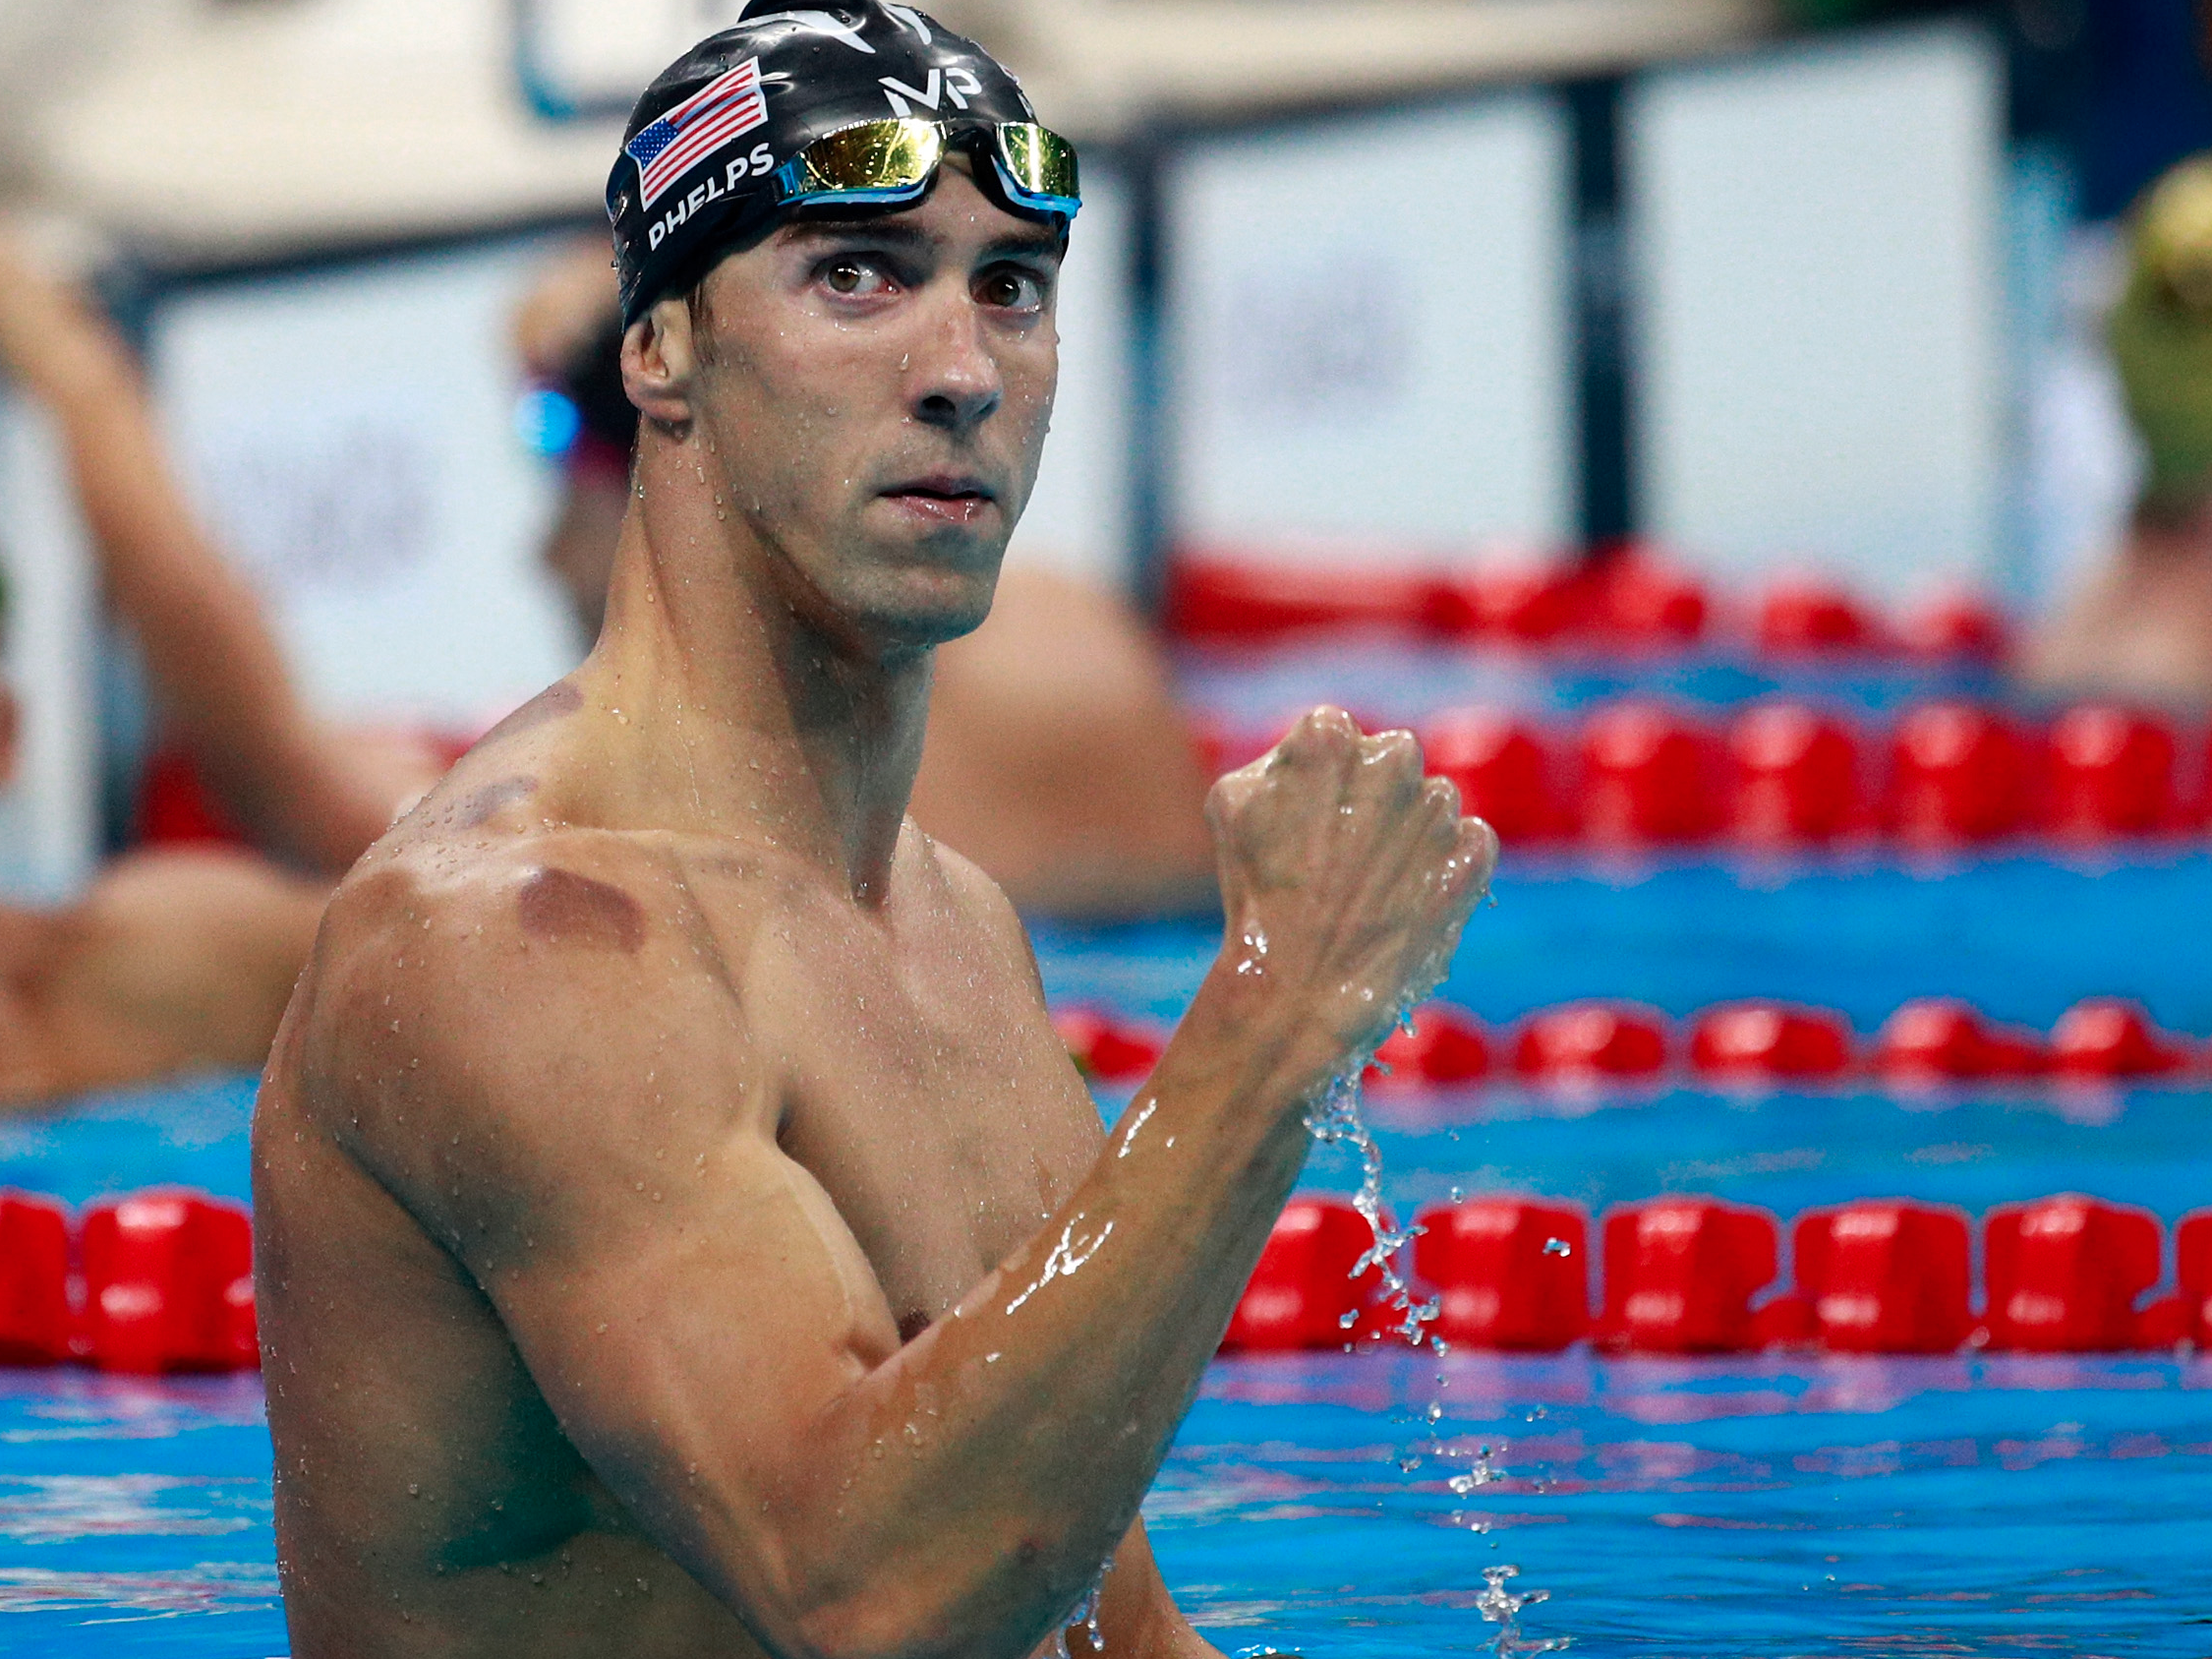 Michael Phelps Rio Olympics - Philips Swimmer , HD Wallpaper & Backgrounds